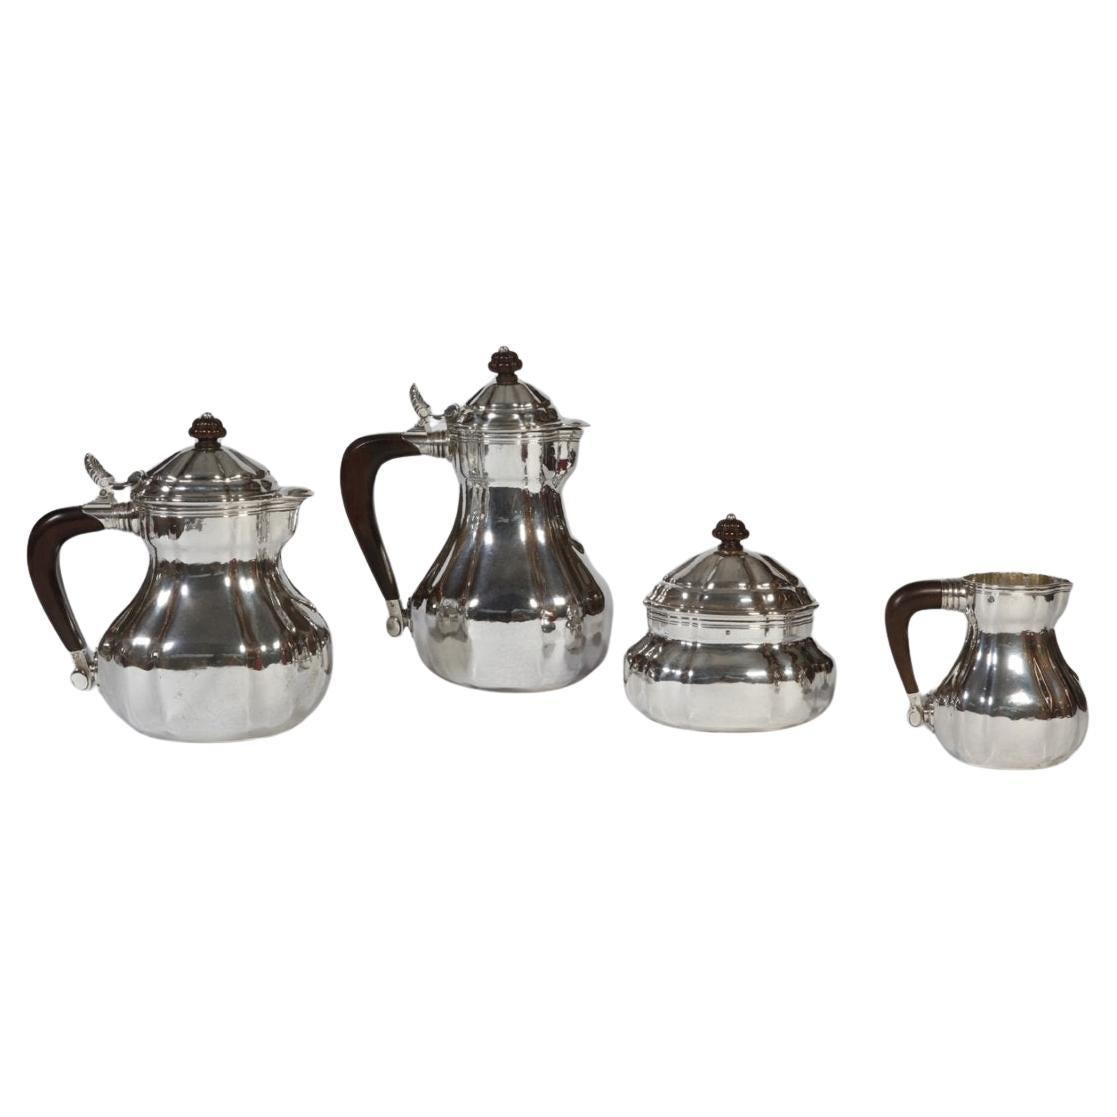 Silversmith Georges Lecomte - Tea-Coffee Set In Silver Art Déco 1925